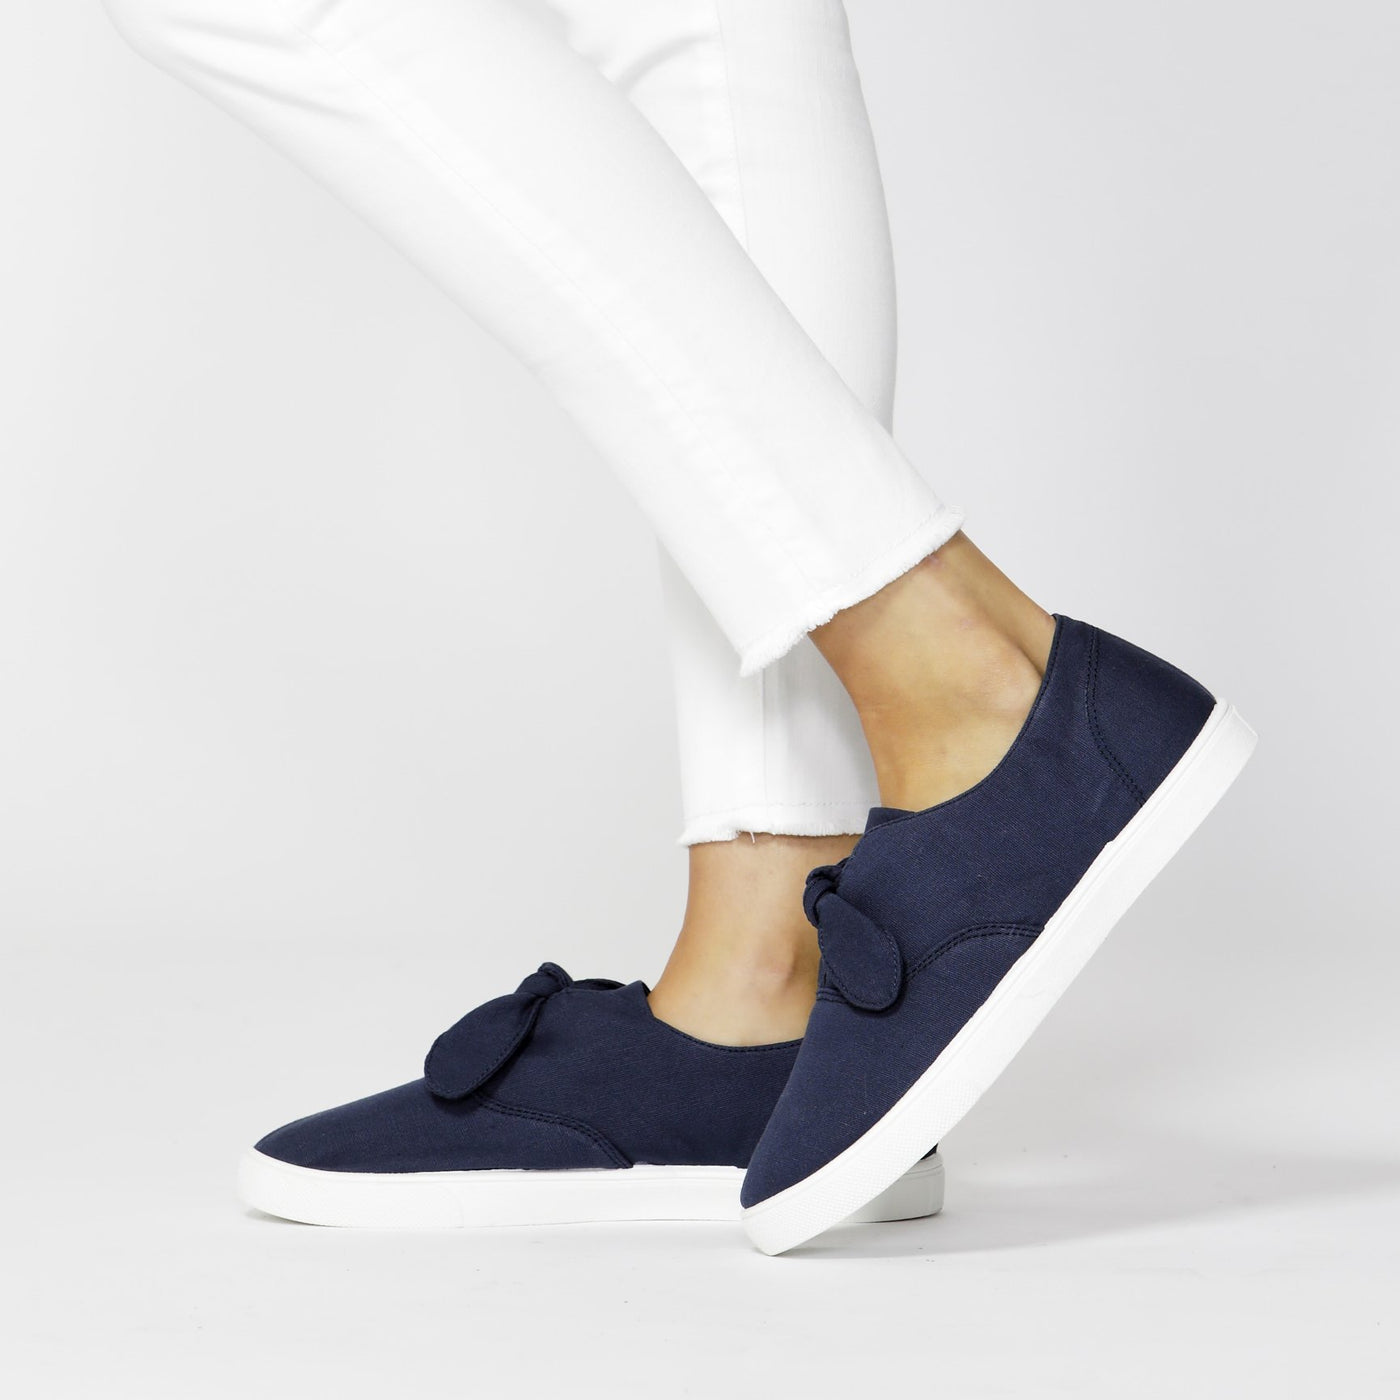 Betty Basics Nautic Plimsolls in Navy Size 6 or 7 Only - Hey Sara